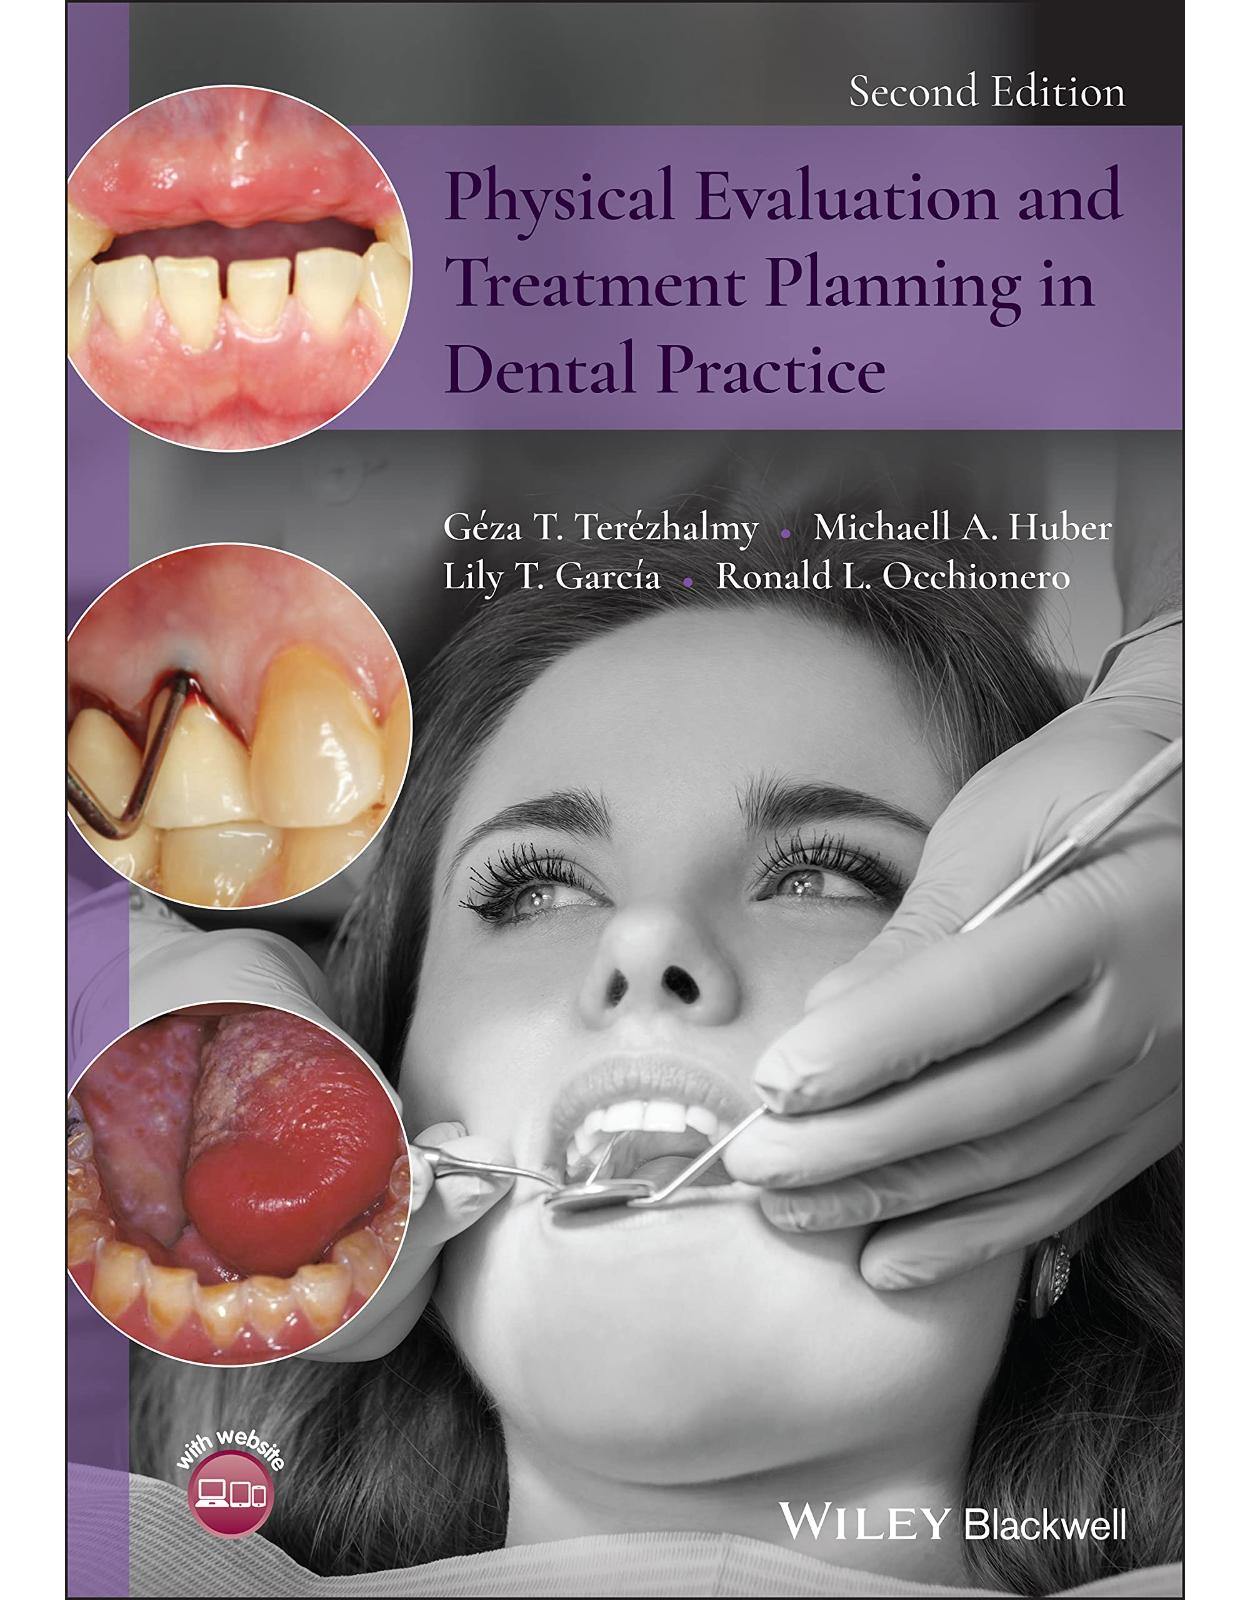 Physical Evaluation and Treatment Planning in Dental Practice, 2nd Edition